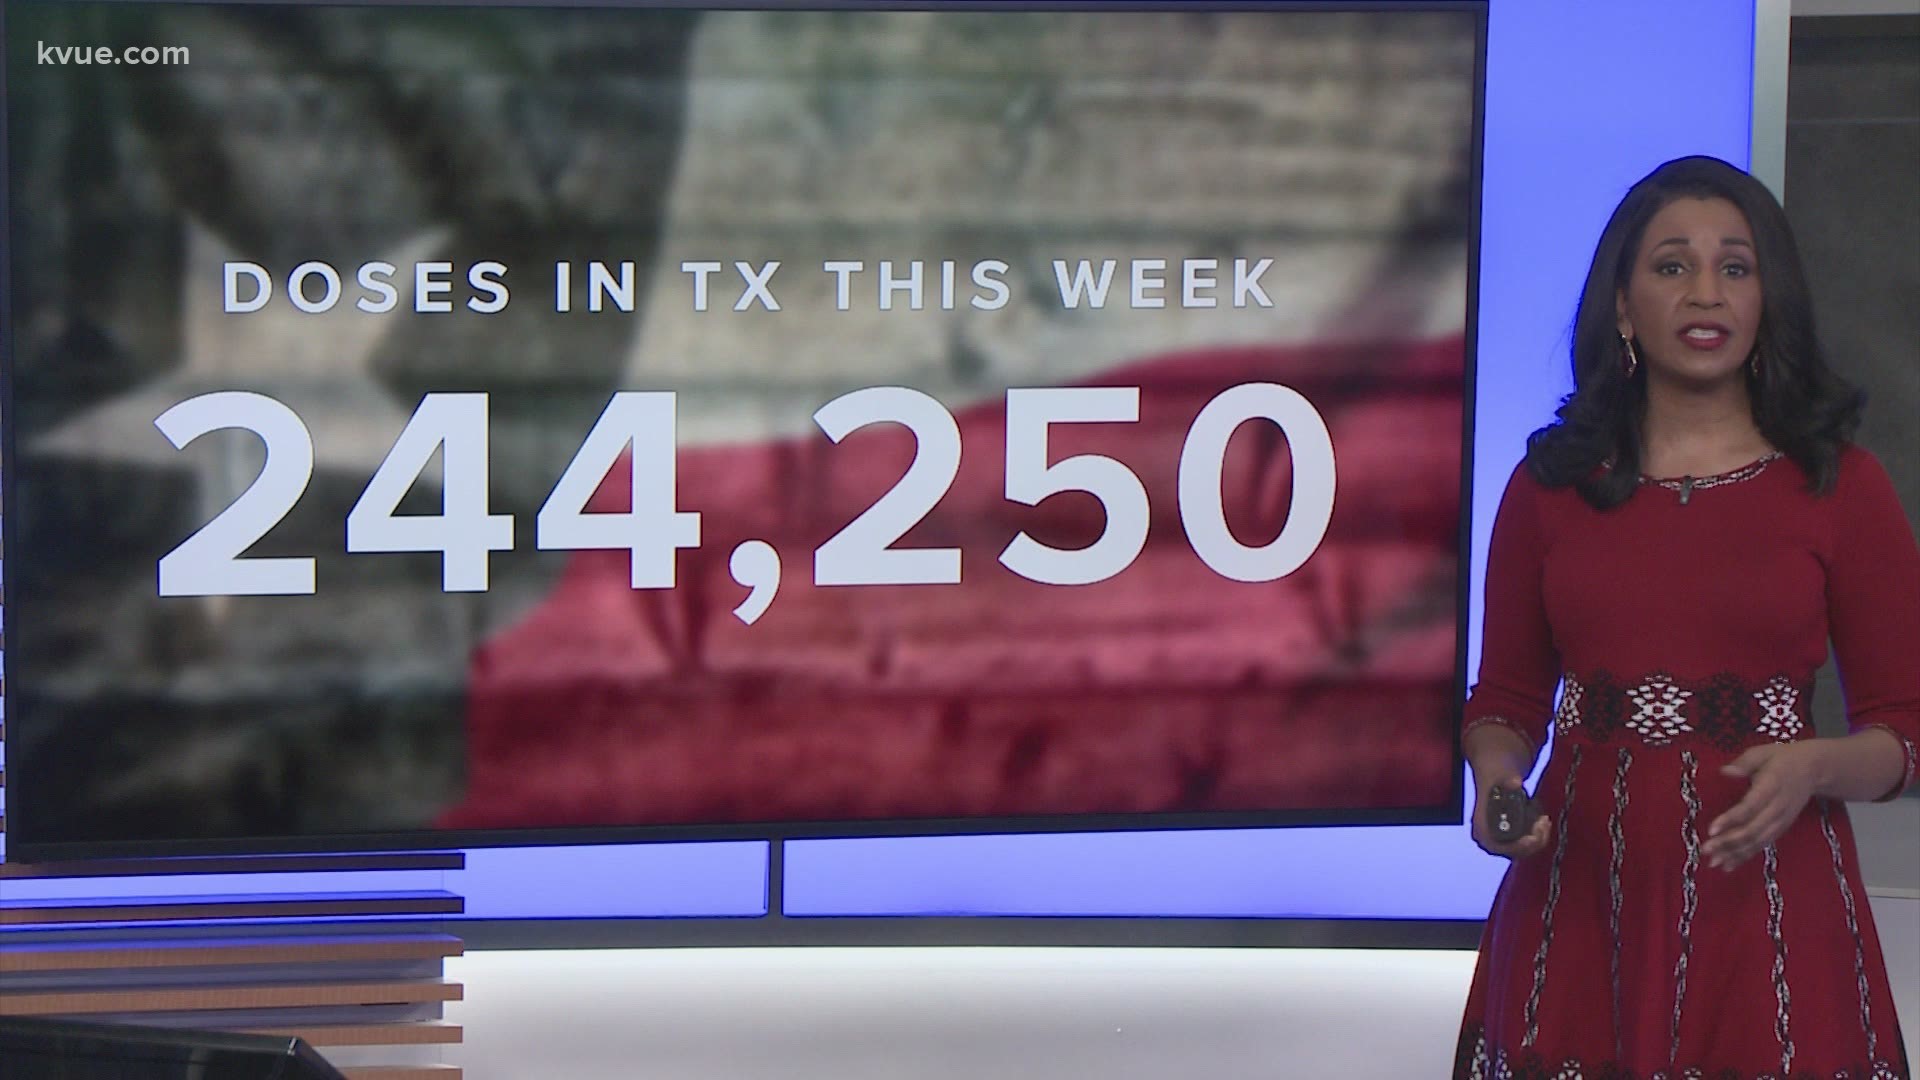 KVUE took a closer look at the COVID-19 vaccines by the numbers, including how many are expected to be delivered in Texas this week.